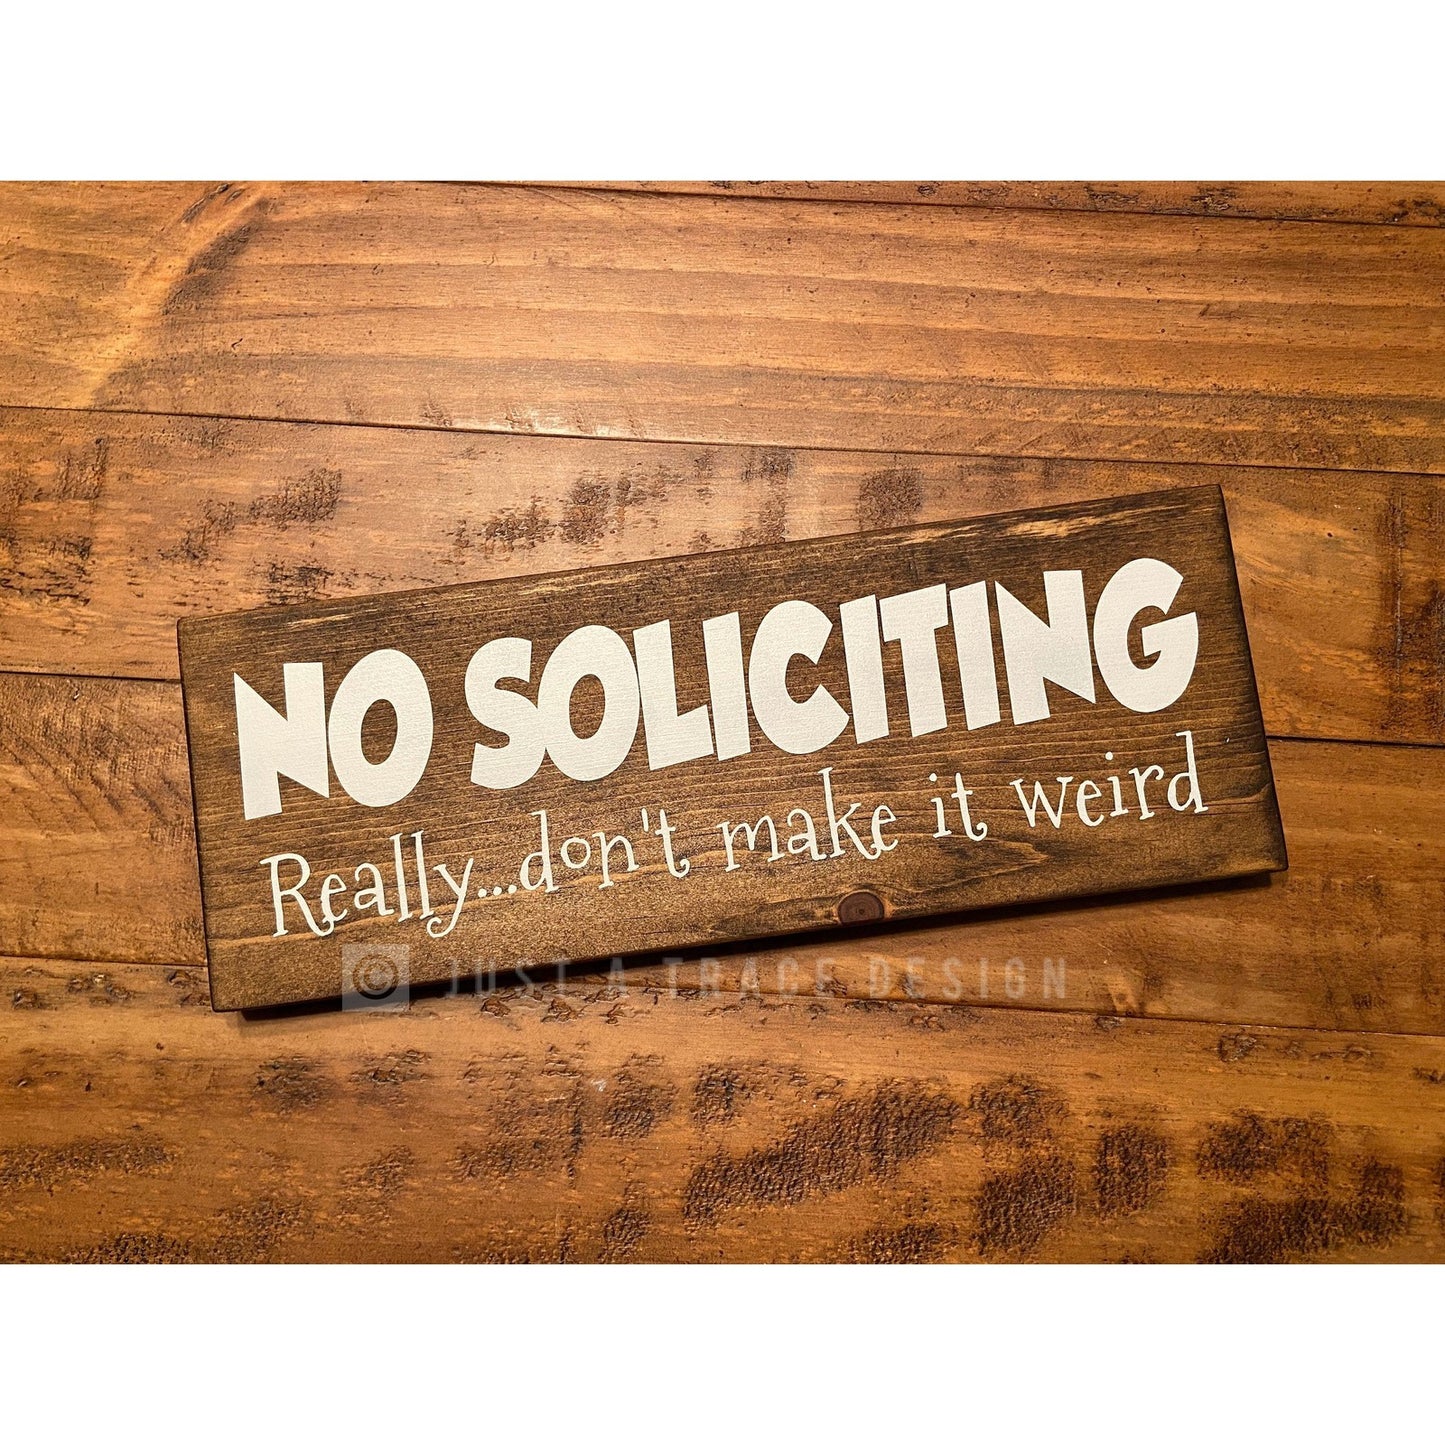 No Soliciting - Really...Don't Make It Weird Sign - Funny Sign - Wall Decor - Home Decor - Front Door